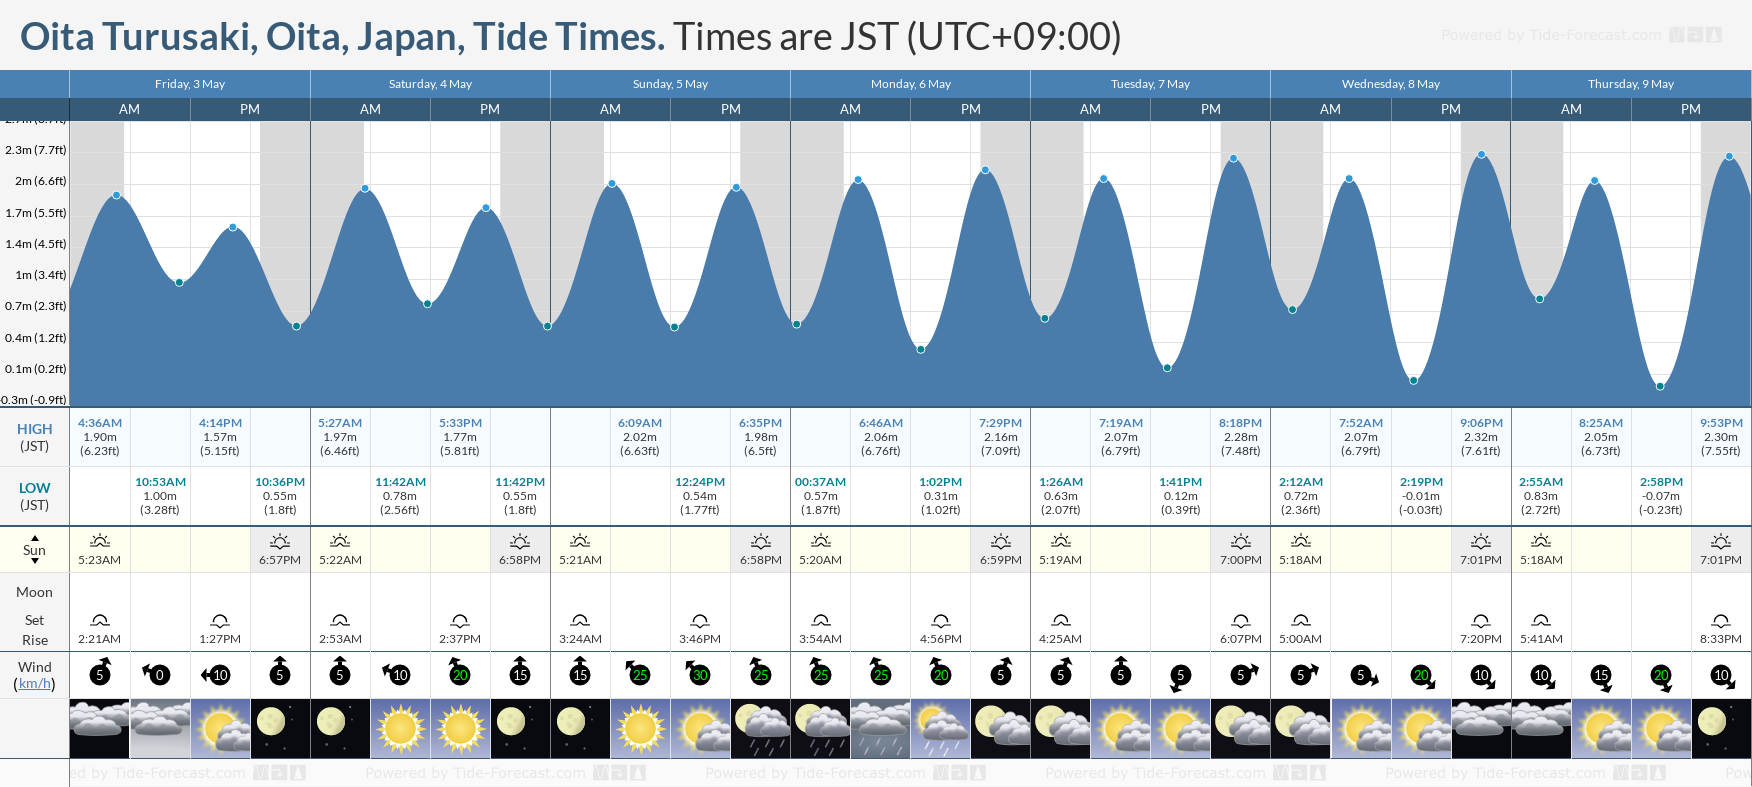 Oita Turusaki, Oita, Japan Tide Chart including high and low tide tide times for the next 7 days